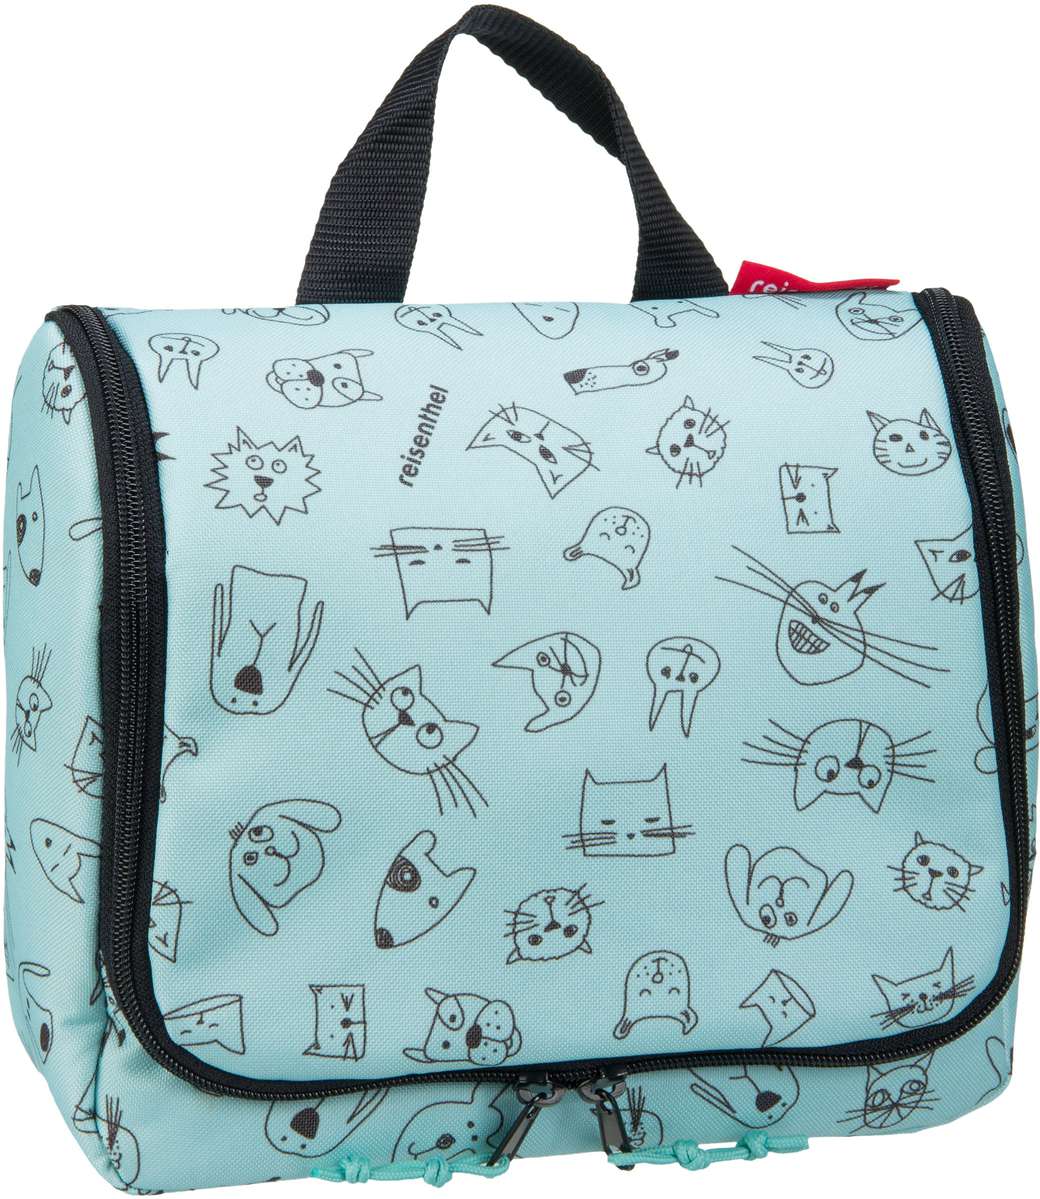 reisenthel kids toiletbag - Cats and Dogs Mint